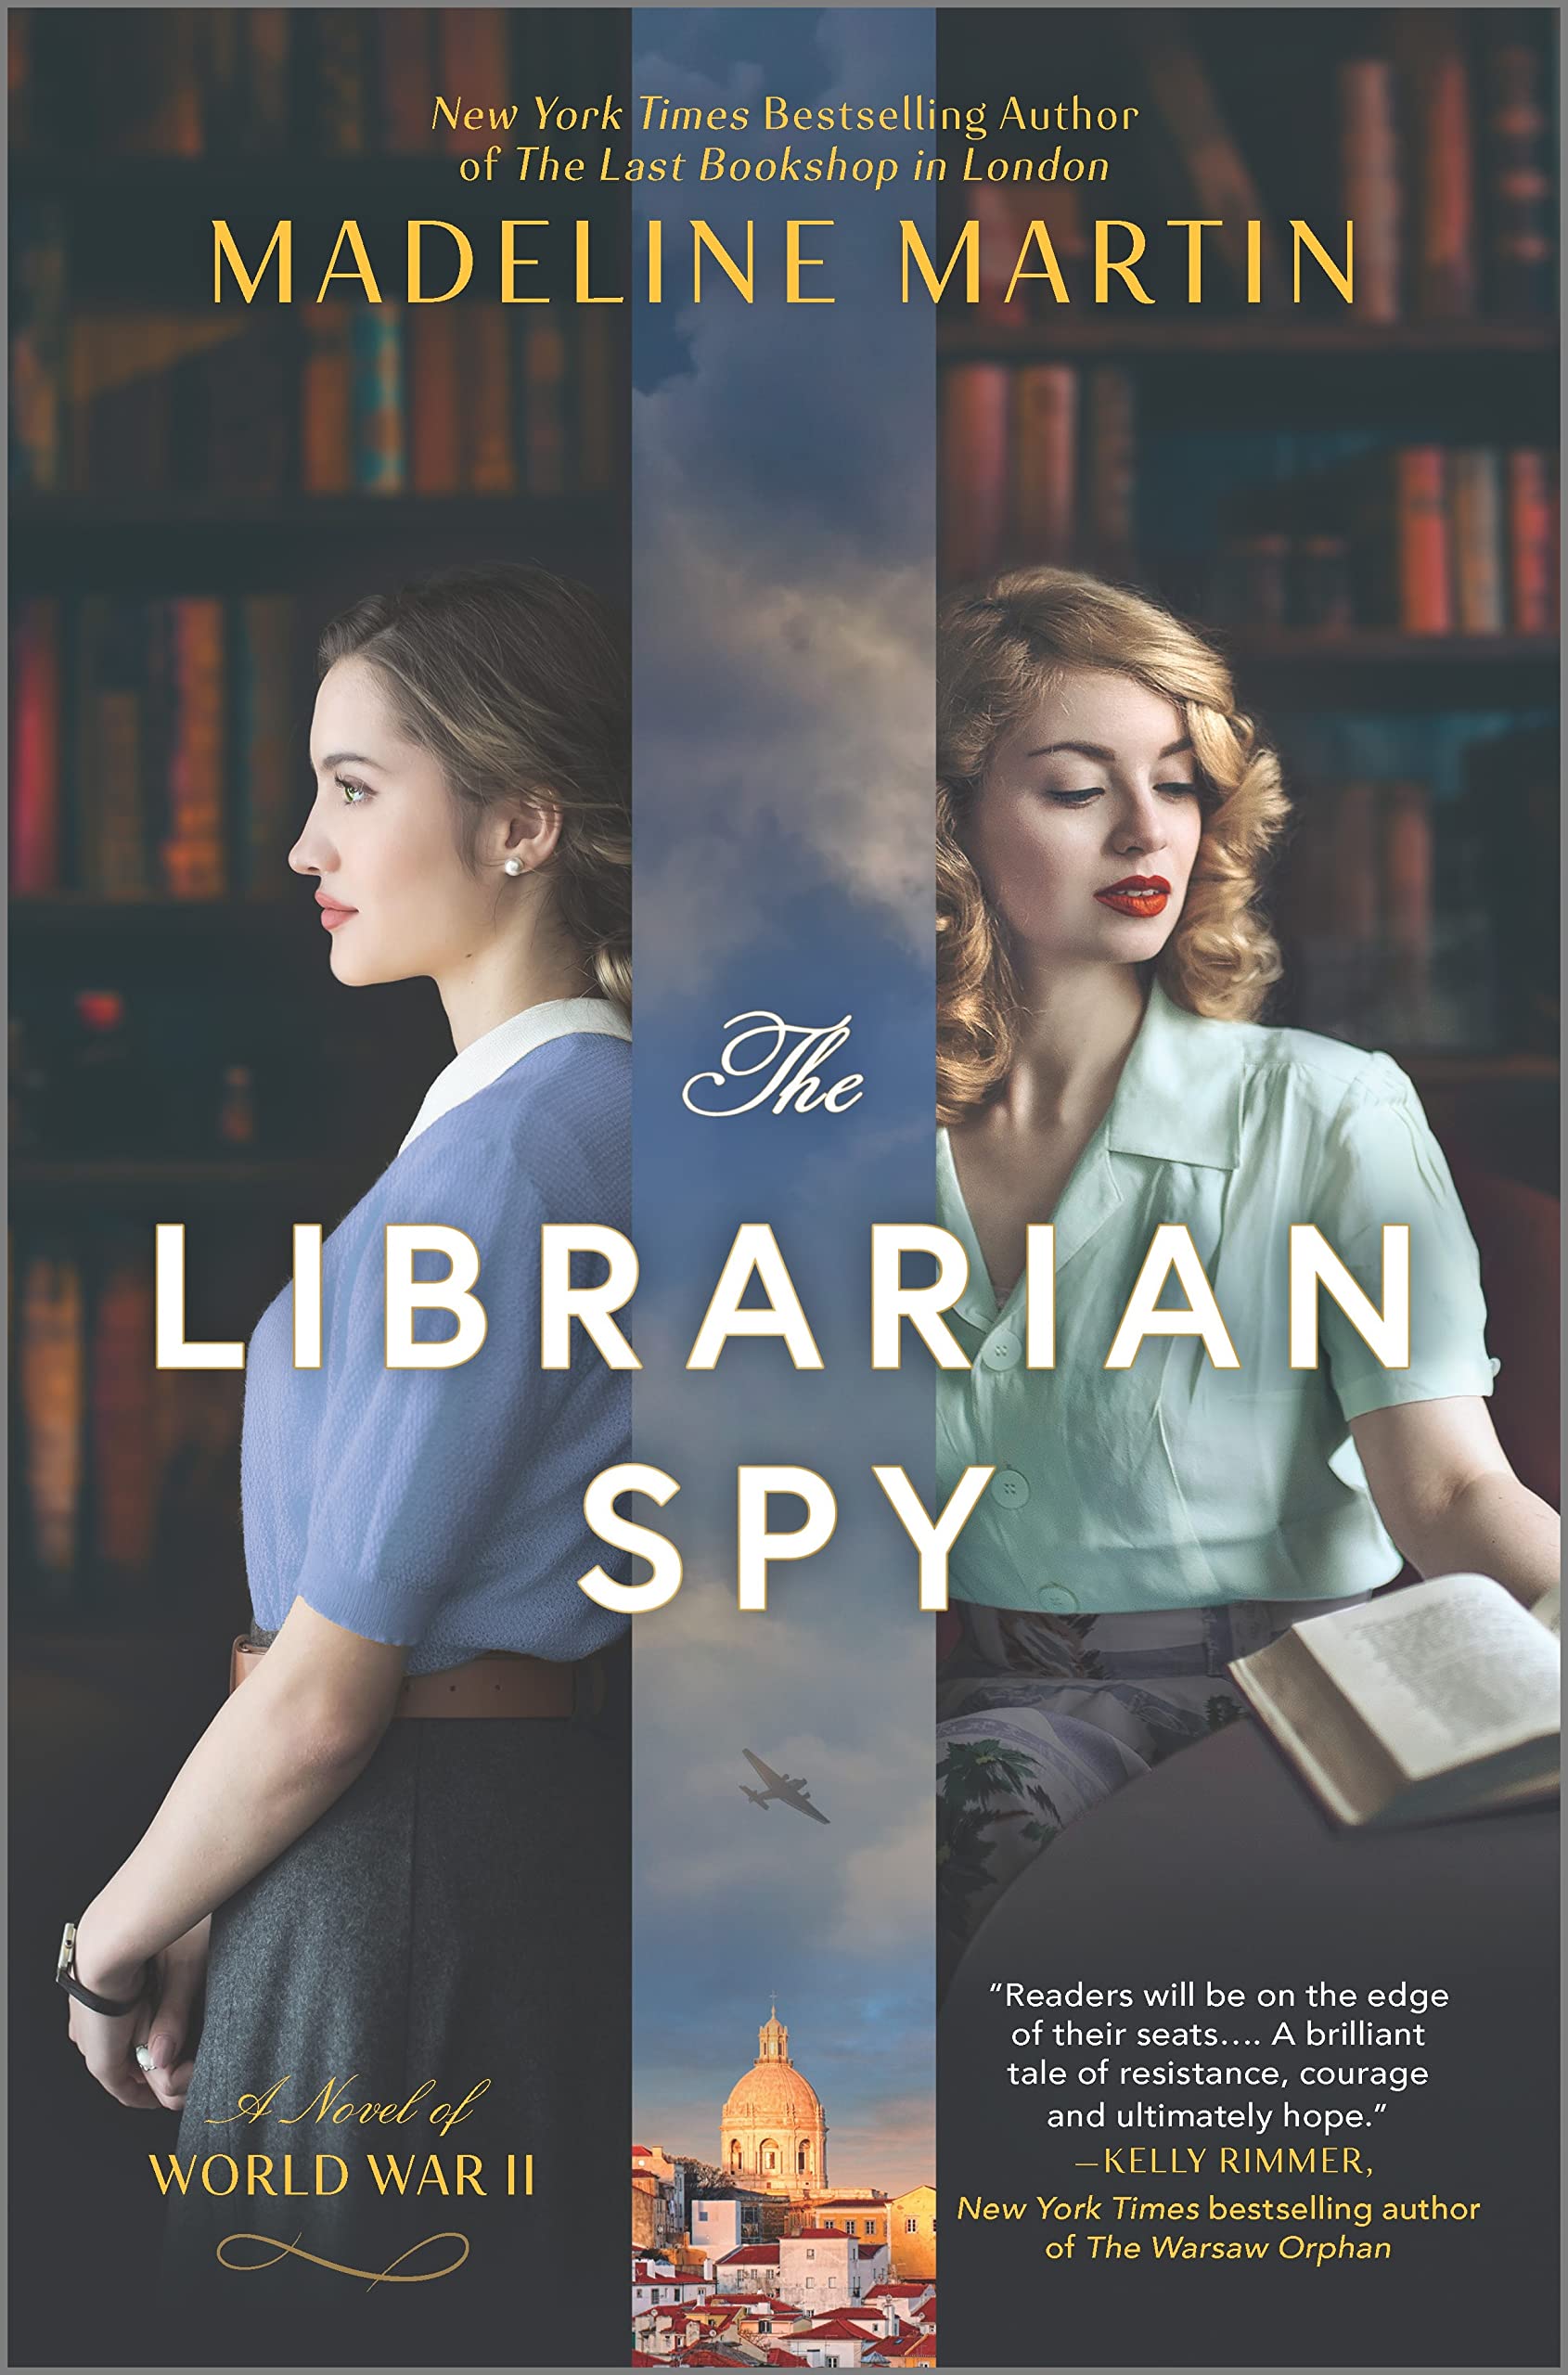 Image for "The Librarian Spy"